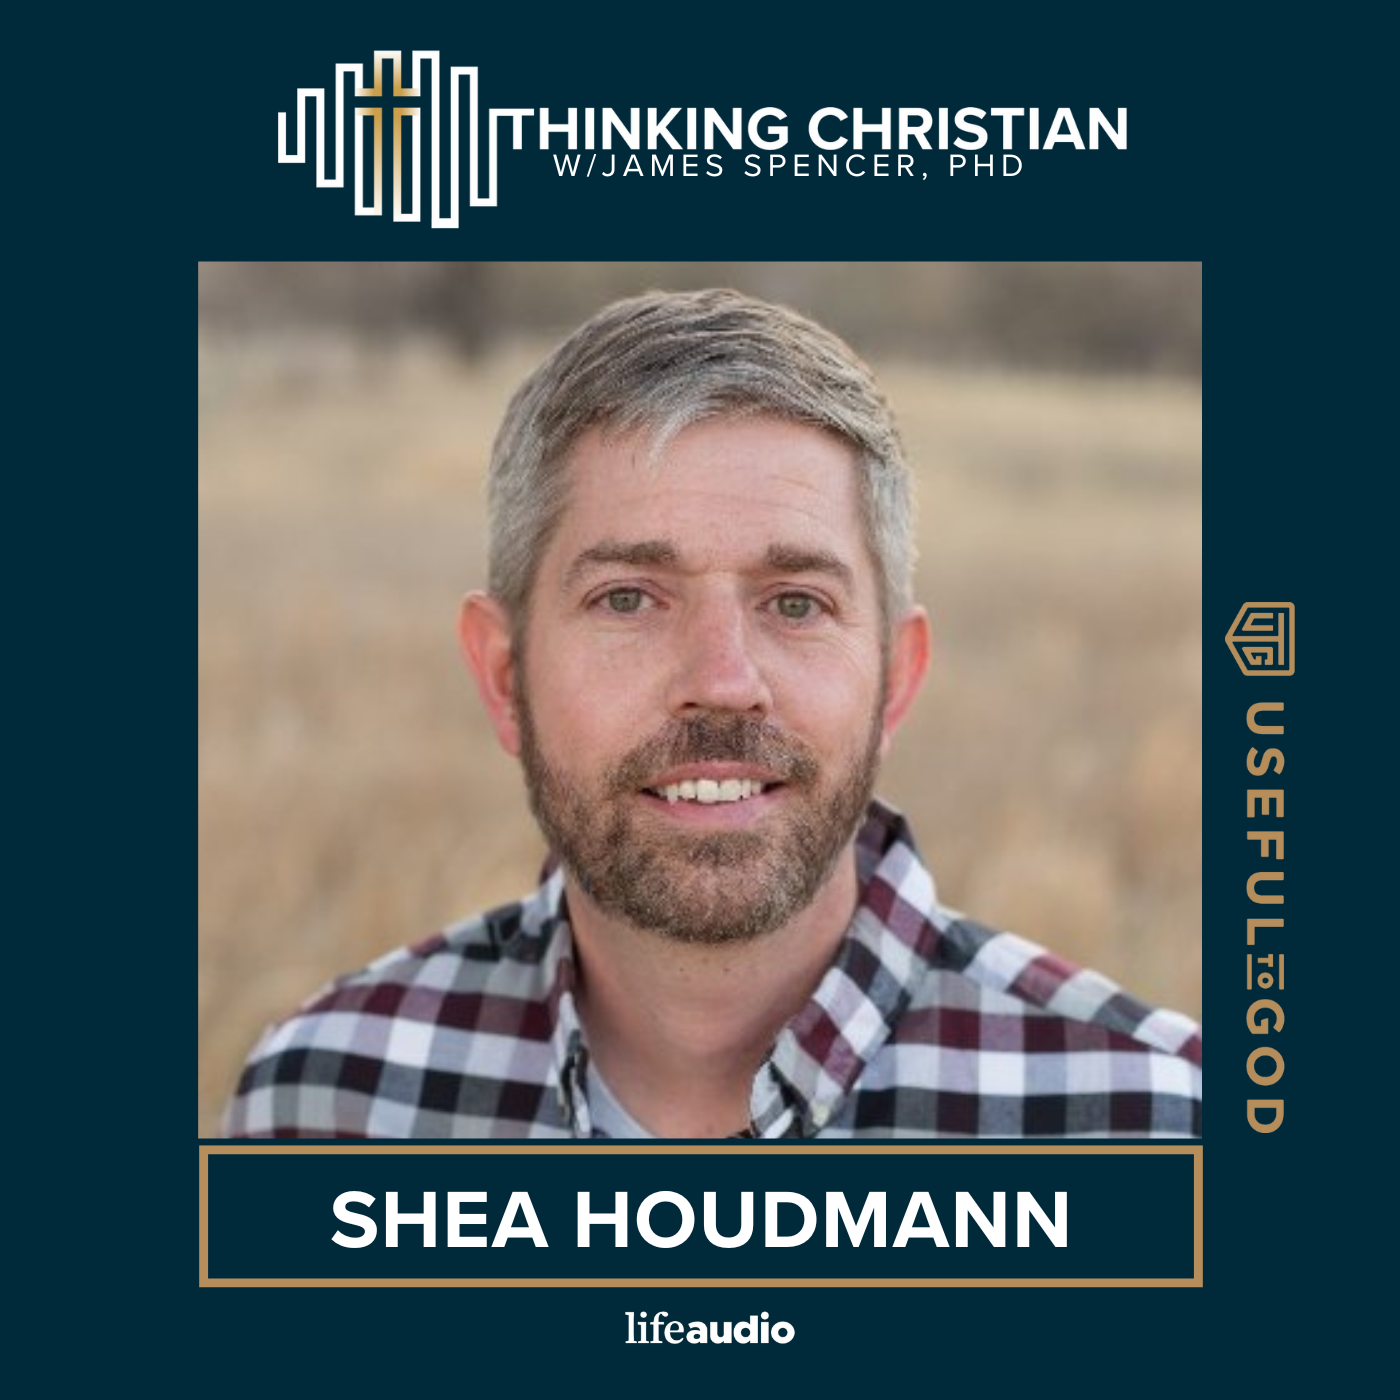 What Are the Biggest Questions Christians Are Asking: A Conversation with Shea Houdman